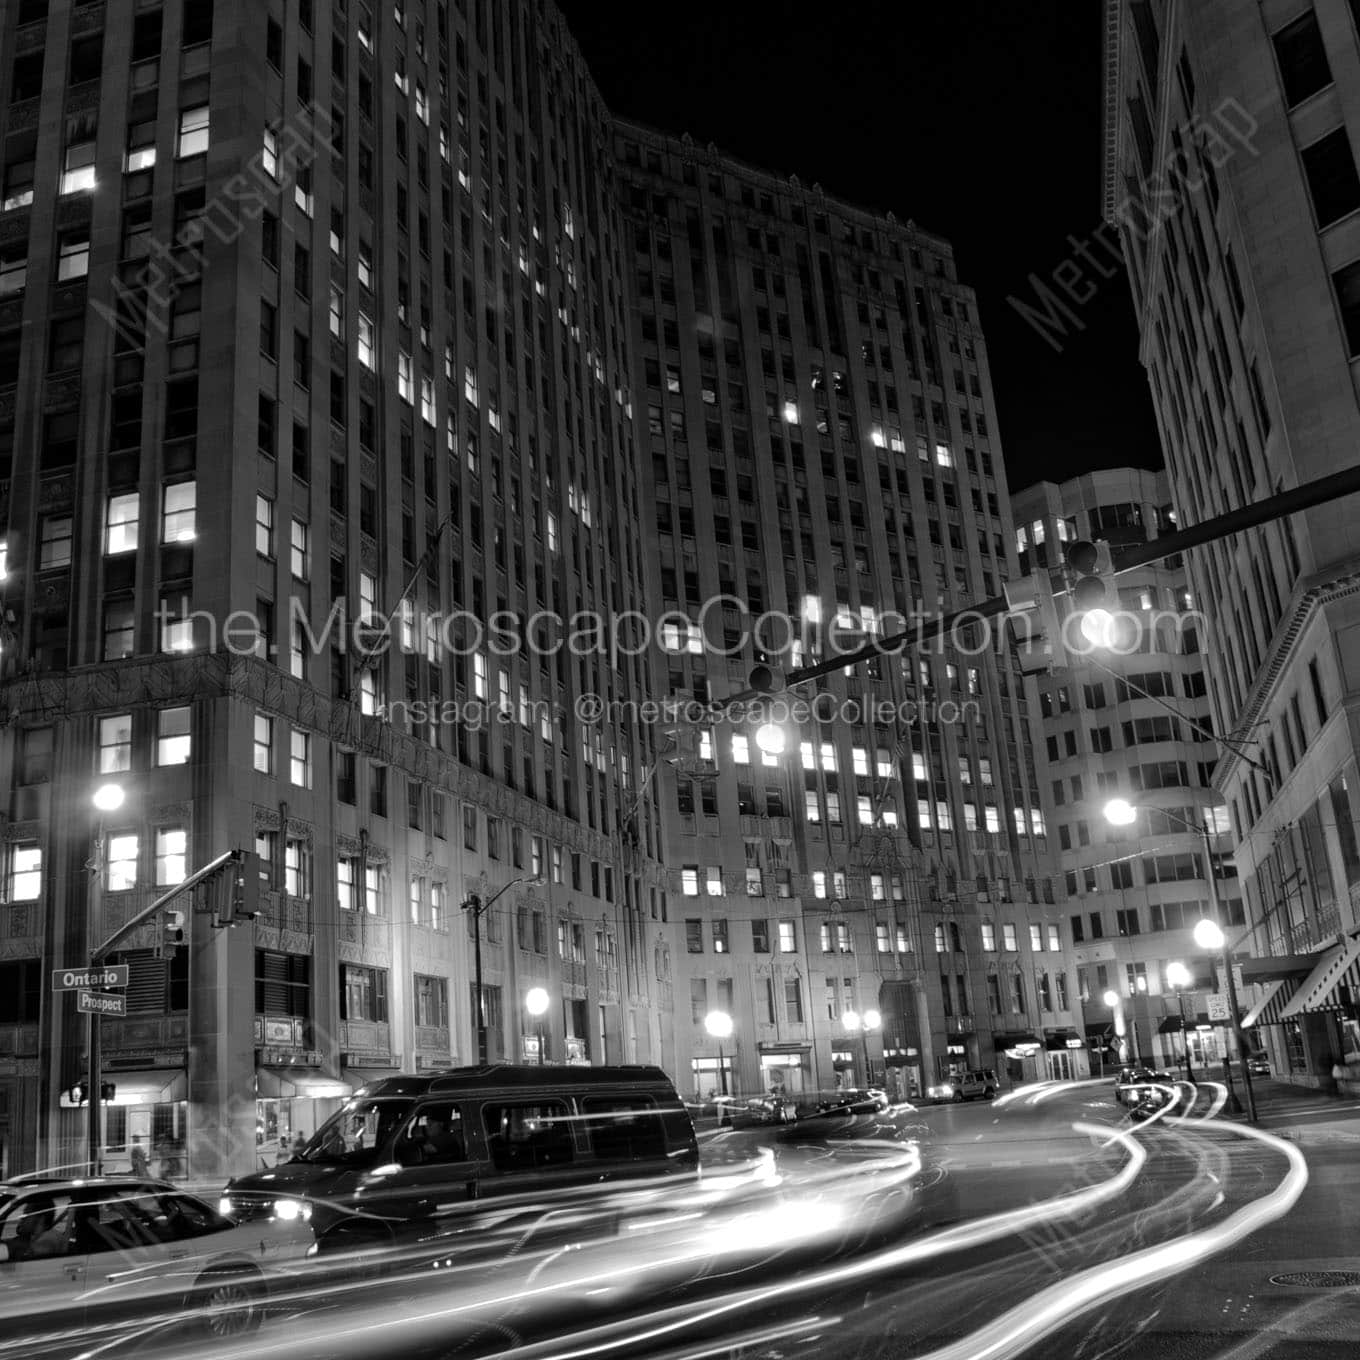 prospect ontario traffic downtown cleveland at night Black & White Office Art